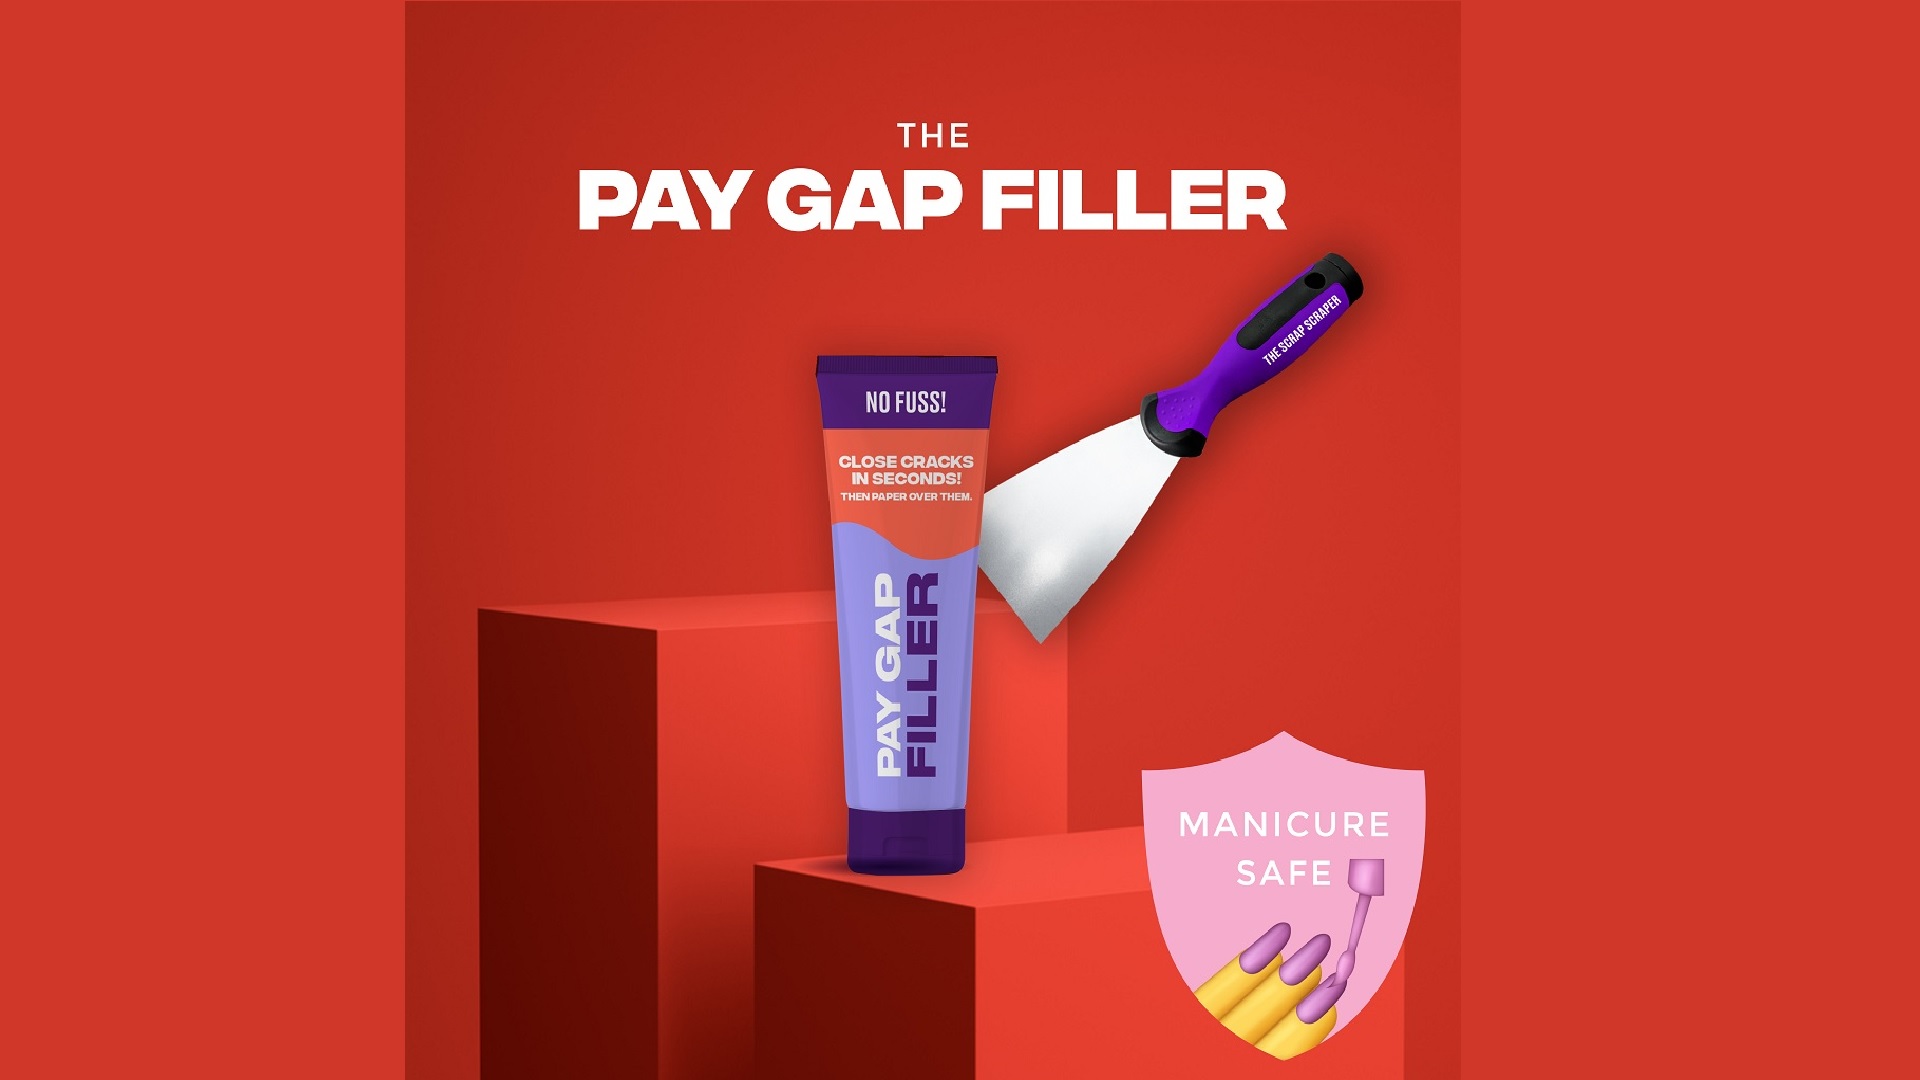 A Pay Gap Filler sold at The Empowerium